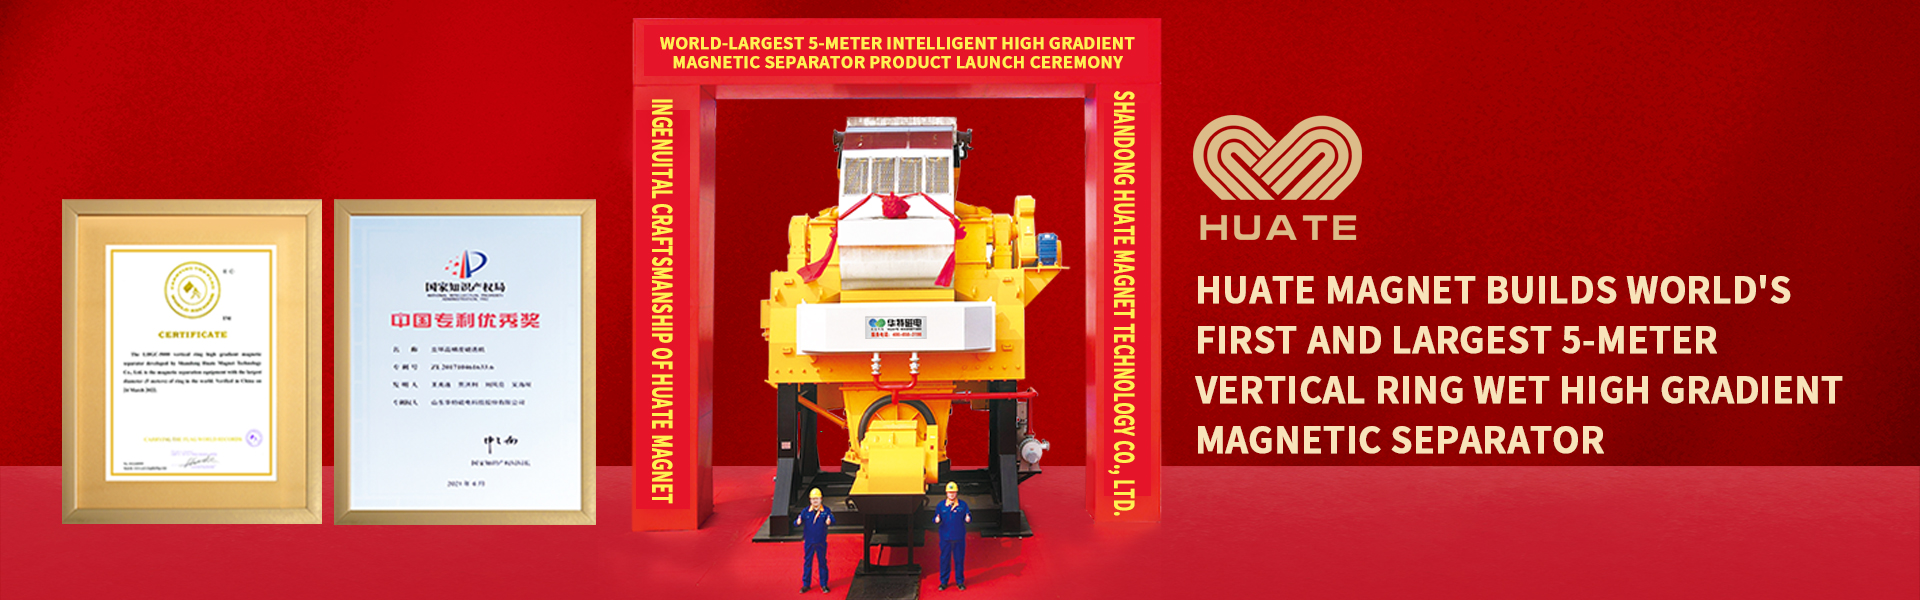 Huate Magnet Builds World’s First and Largest  5-Meter Vertical Ring Wet High Gradient Magnetic Separator